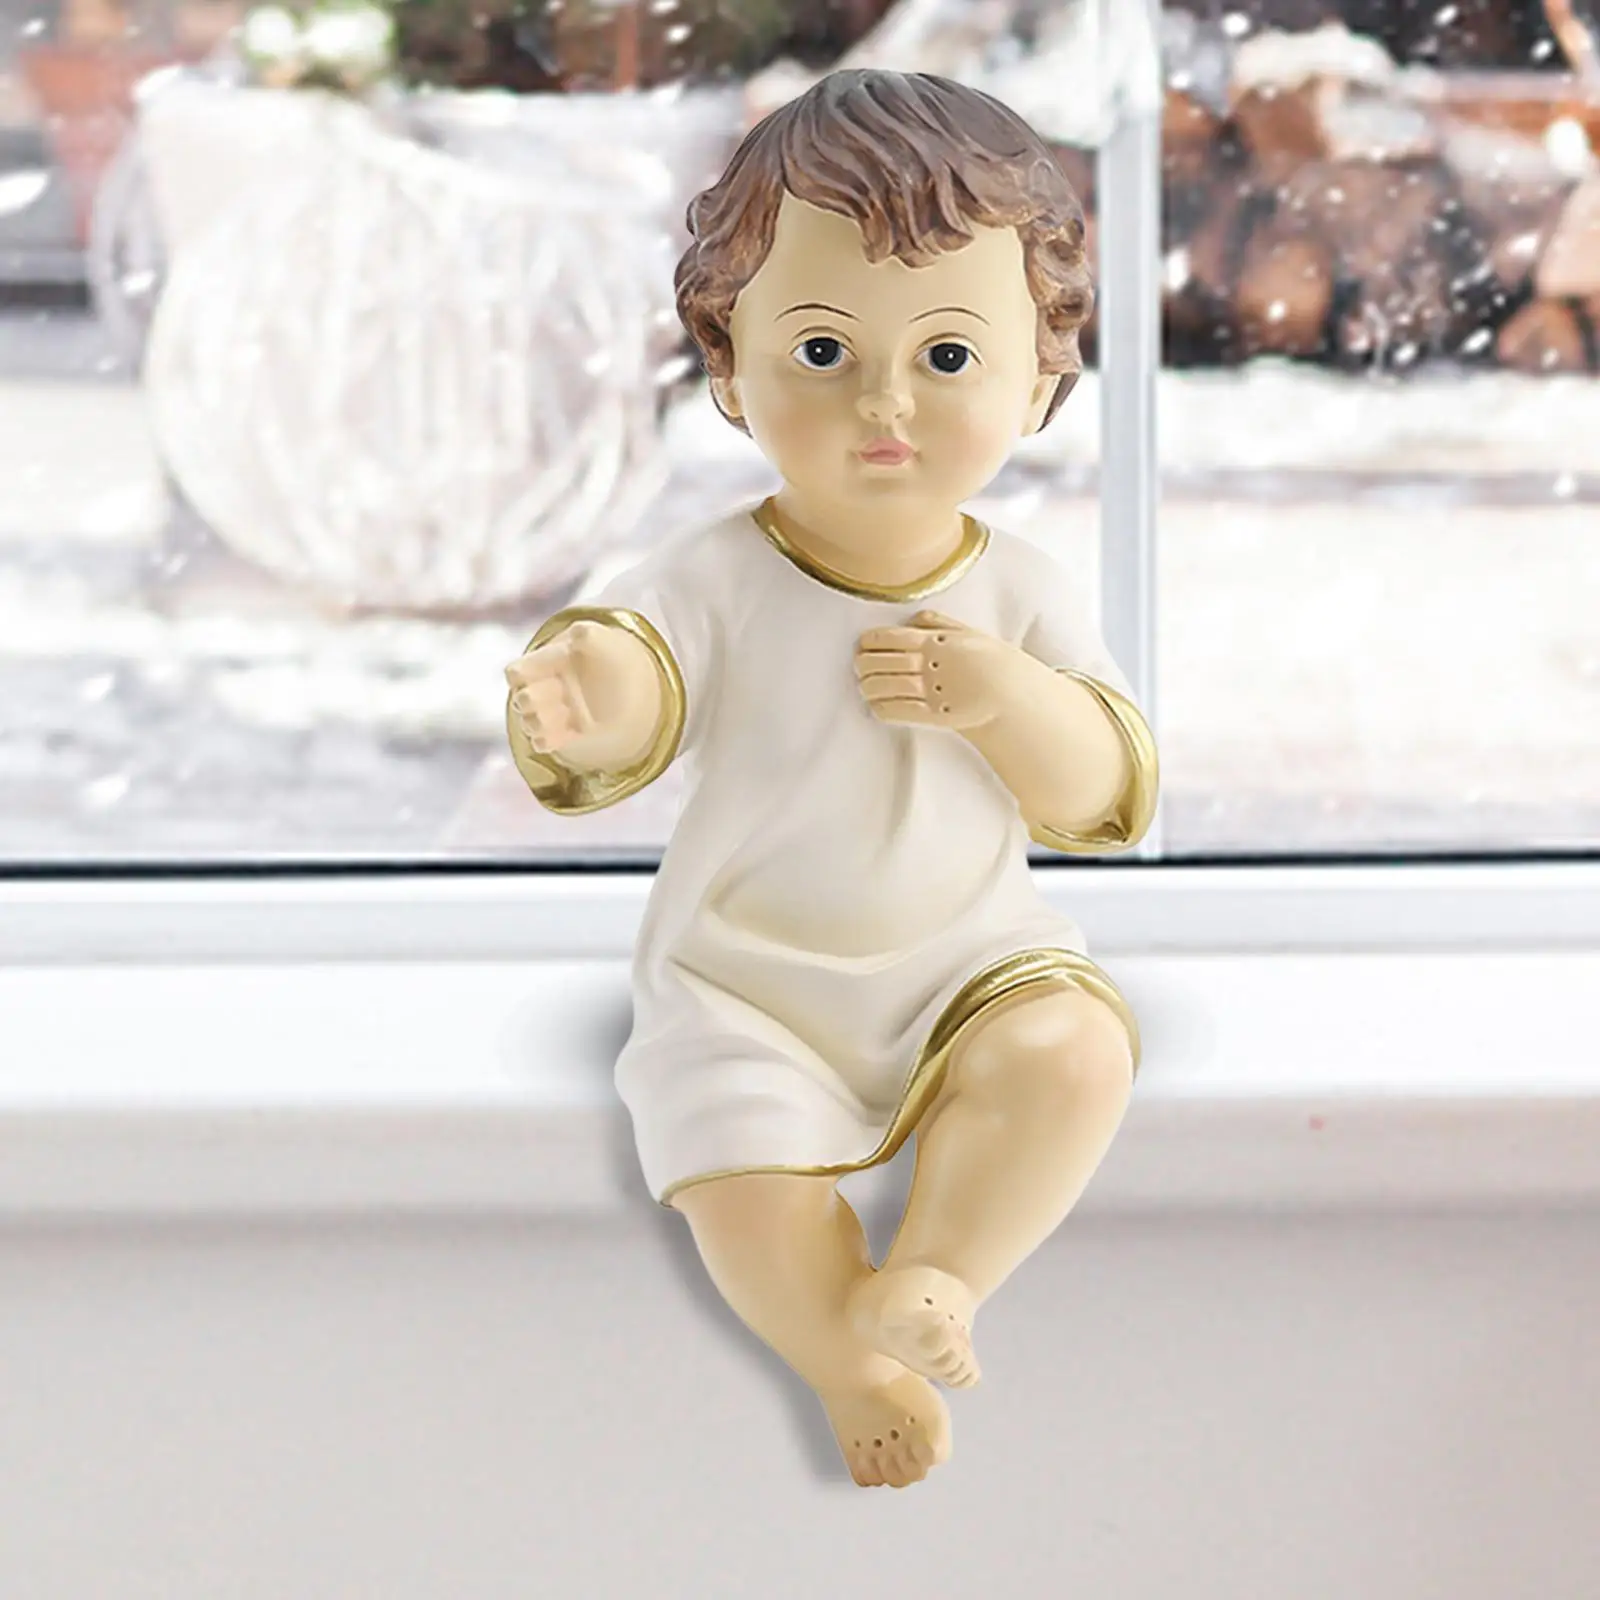 Jesus Baby Figurine Adornment Resin Craft Miniature Sculpture Religious Nativity Statue for Home Office Church Decor Gifts